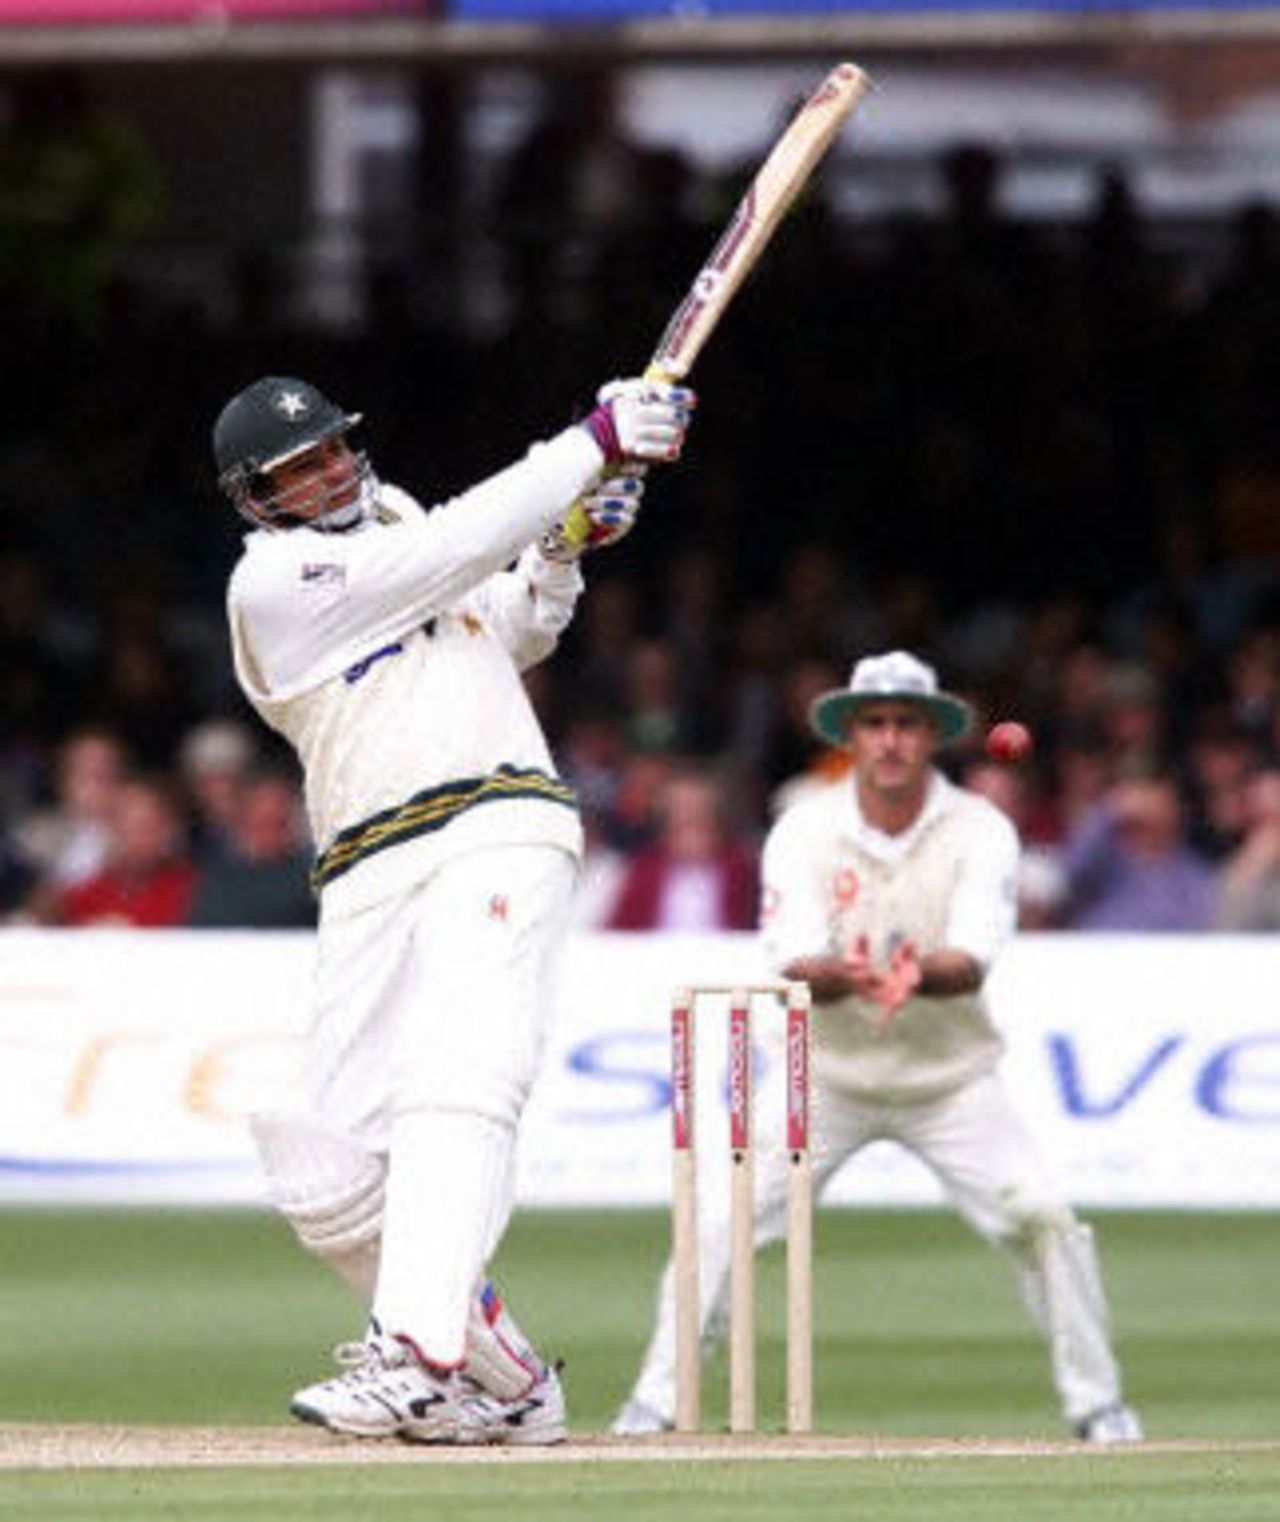 Inzamam-ul-Haq hits a four, day 4, 1st Test at Lord's, 17-21 May 2001.